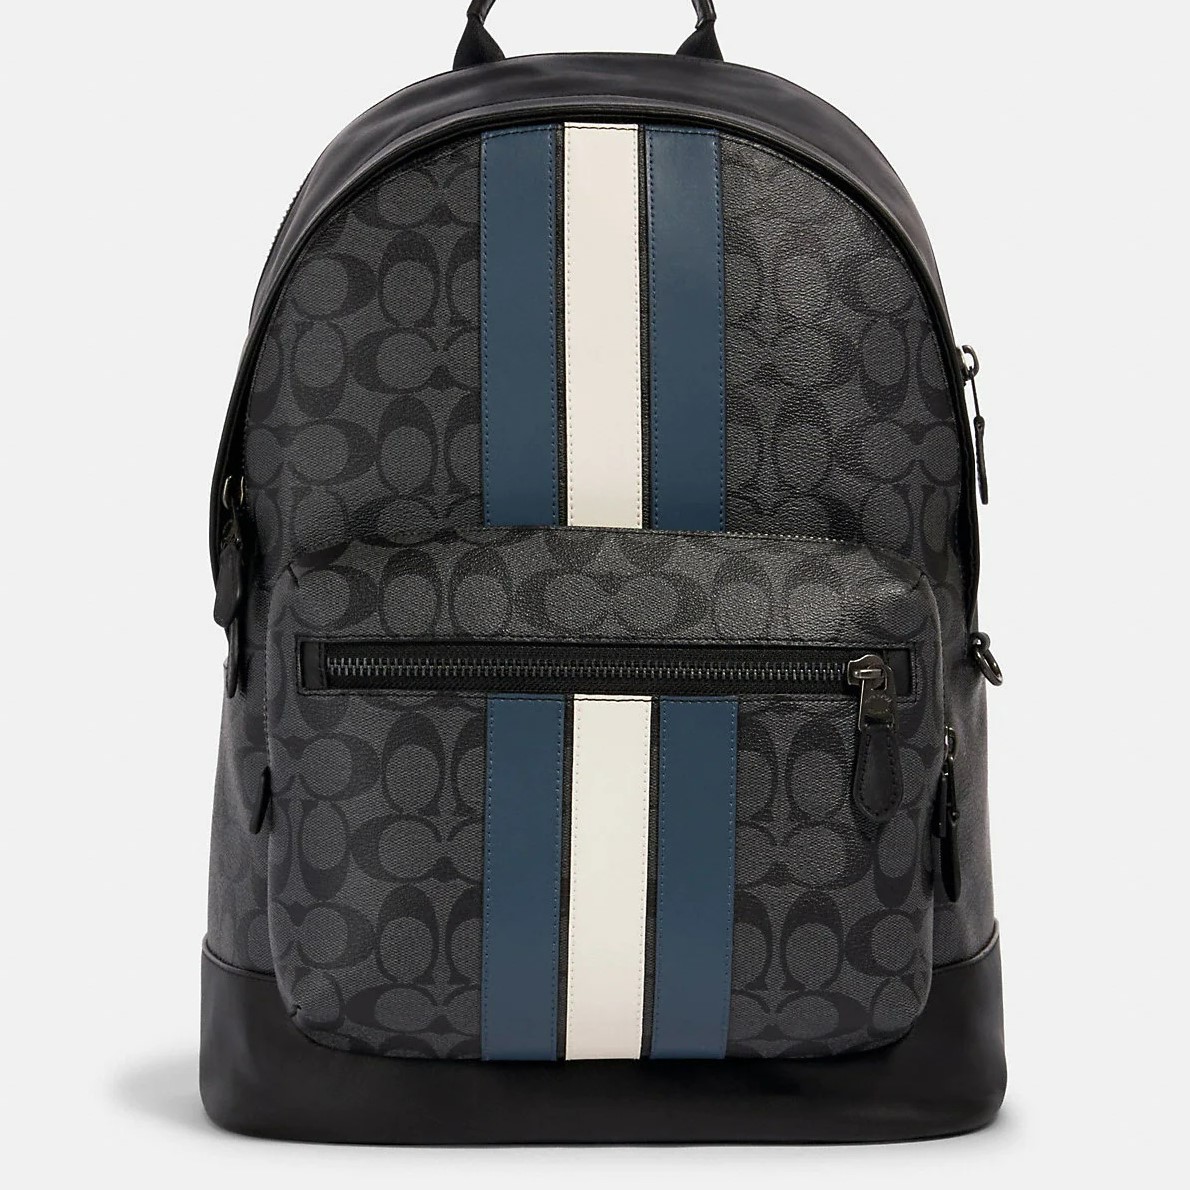 BALO COACH NAM PHỐI SỌC XANH TRẮNG WEST BACKPACK IN SIGNATURE CANVAS WITH VARSITY STRIPE 4